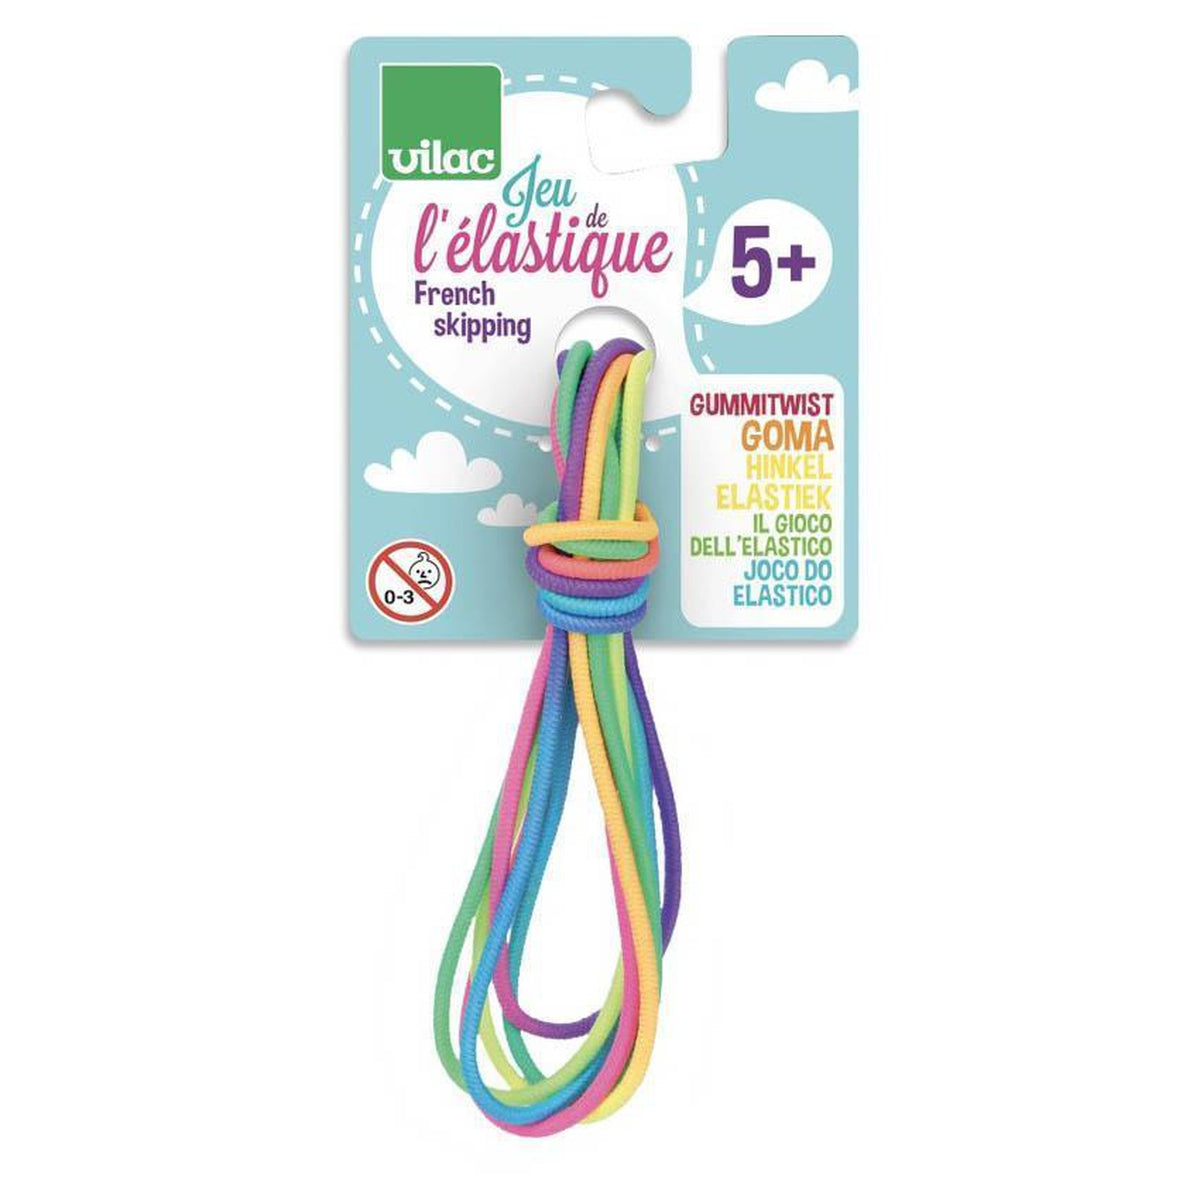 Vilac french skipping-outdoor-Fire the Imagination-Dilly Dally Kids